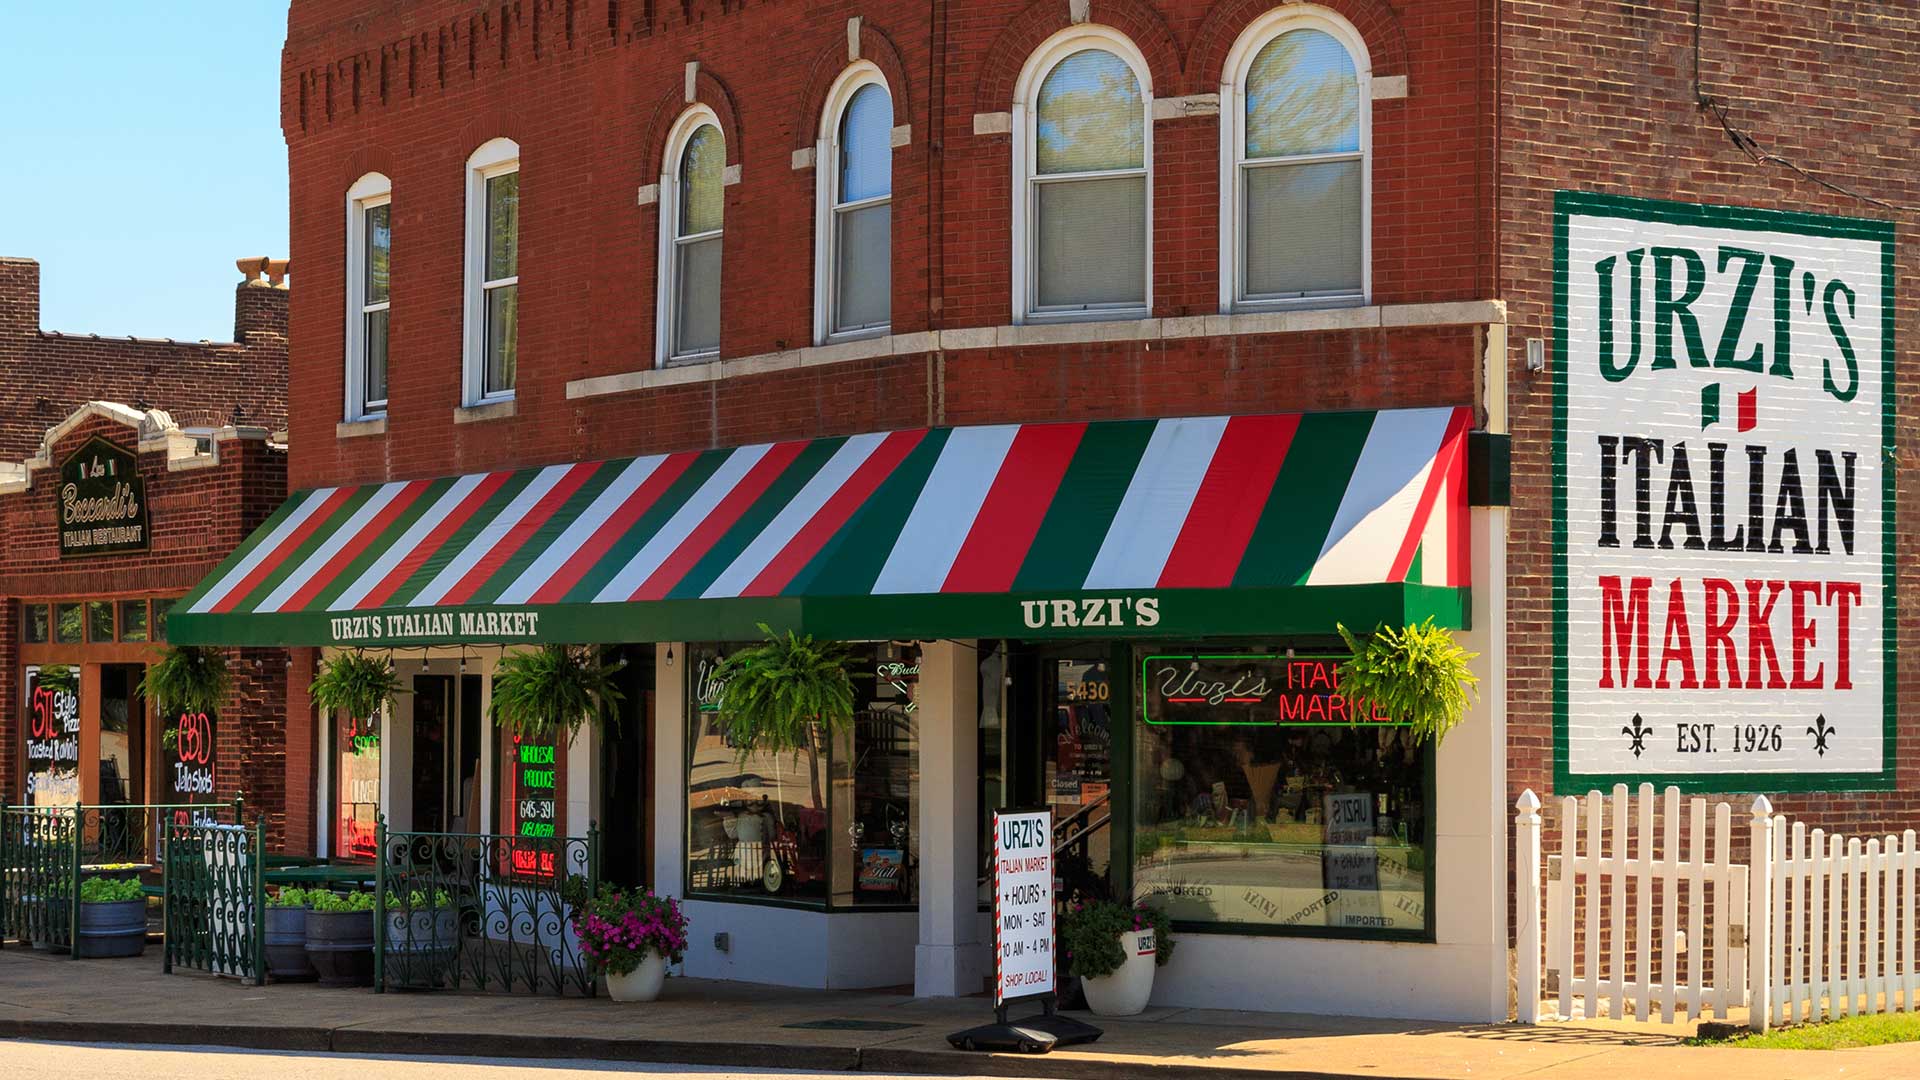 An Italian market in The Hill district of St. Louis. A red, green and white awning hangs out front with several potted plants set along the sidewalk.